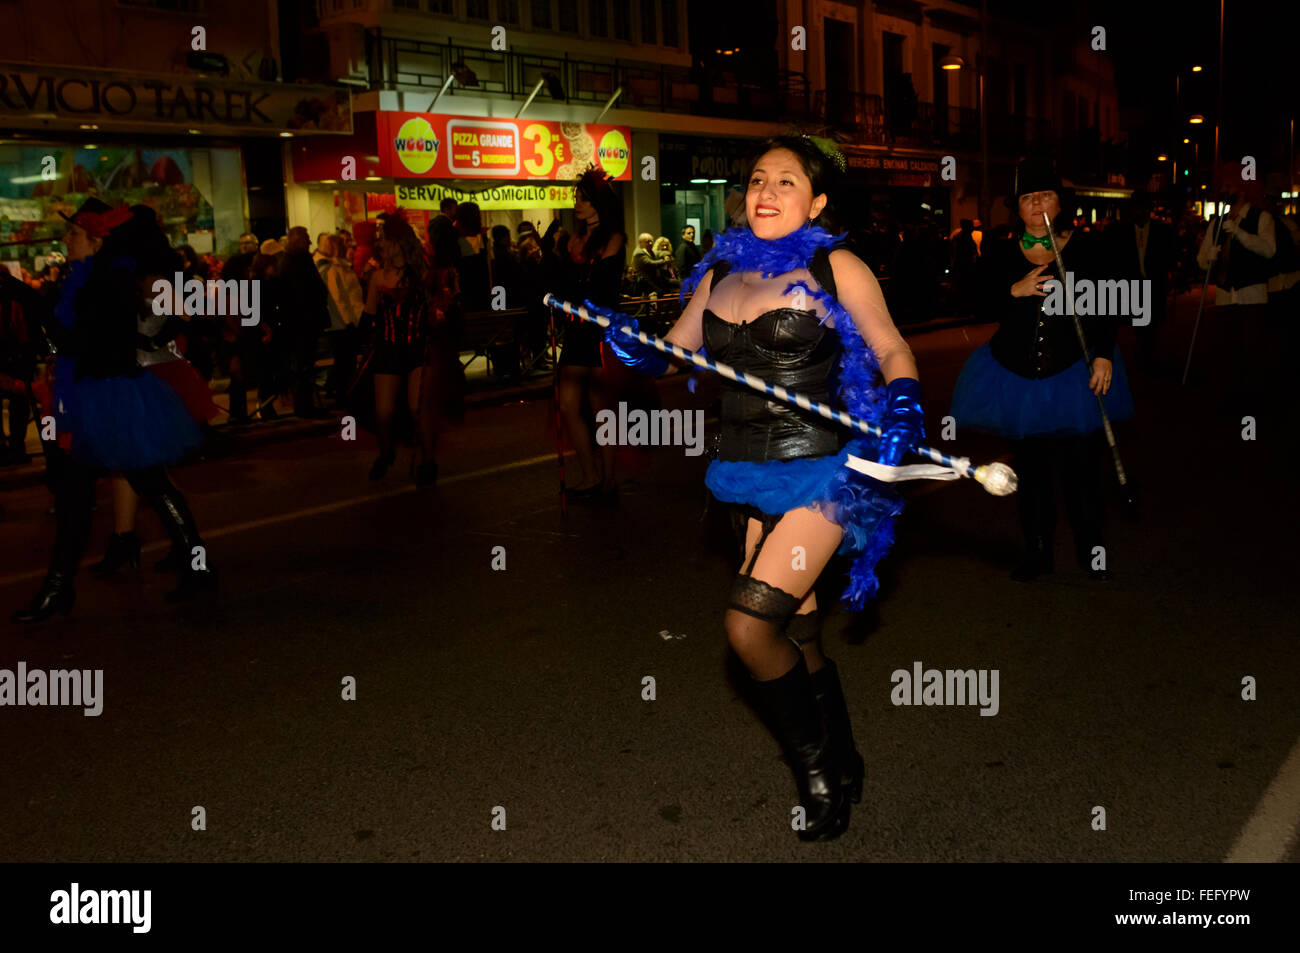 Madrid, Spain 6th February 2016. A female performer in a blue and black costume from the Asociación Gruñidos Salvajes. The carnival parade in Madrid, Gran Pasacalles del Carnaval (The Grand Carnival Parade), was held in the district of Tetuán Madrid, Spain.  Credit:  Lawrence JC Baron/Alamy Live News. Stock Photo